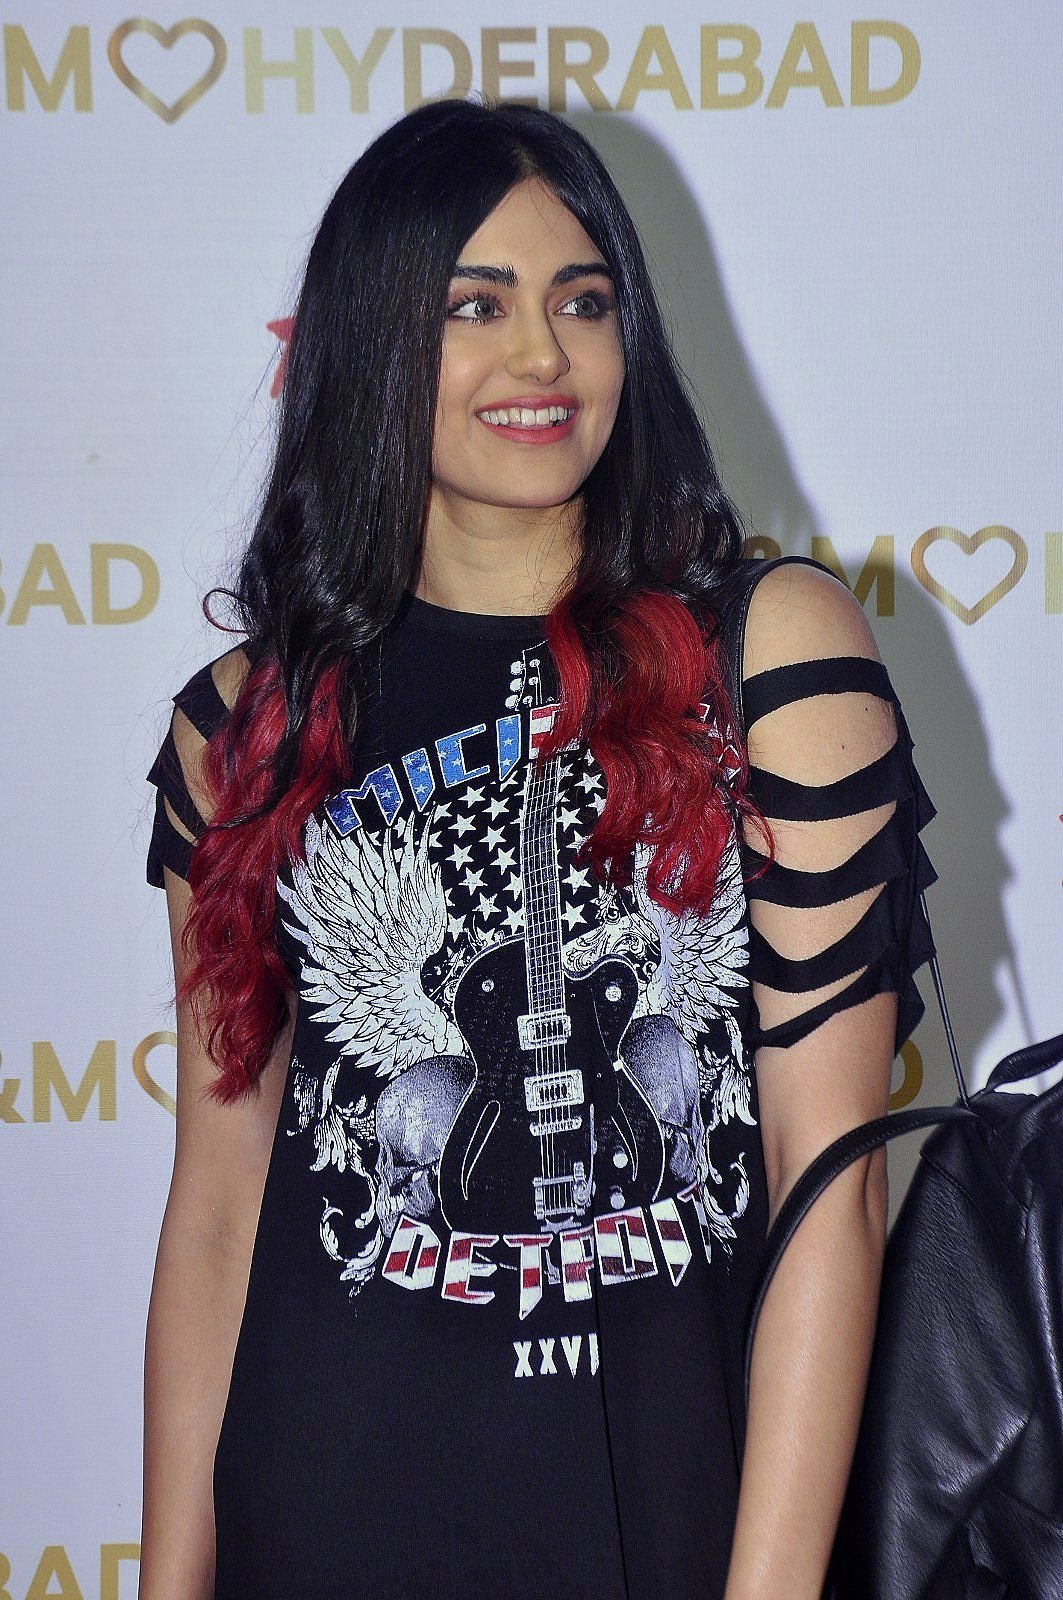 Actress Adah Sharma at the red carpet of H&M VIP Party Photos | Picture 1494561